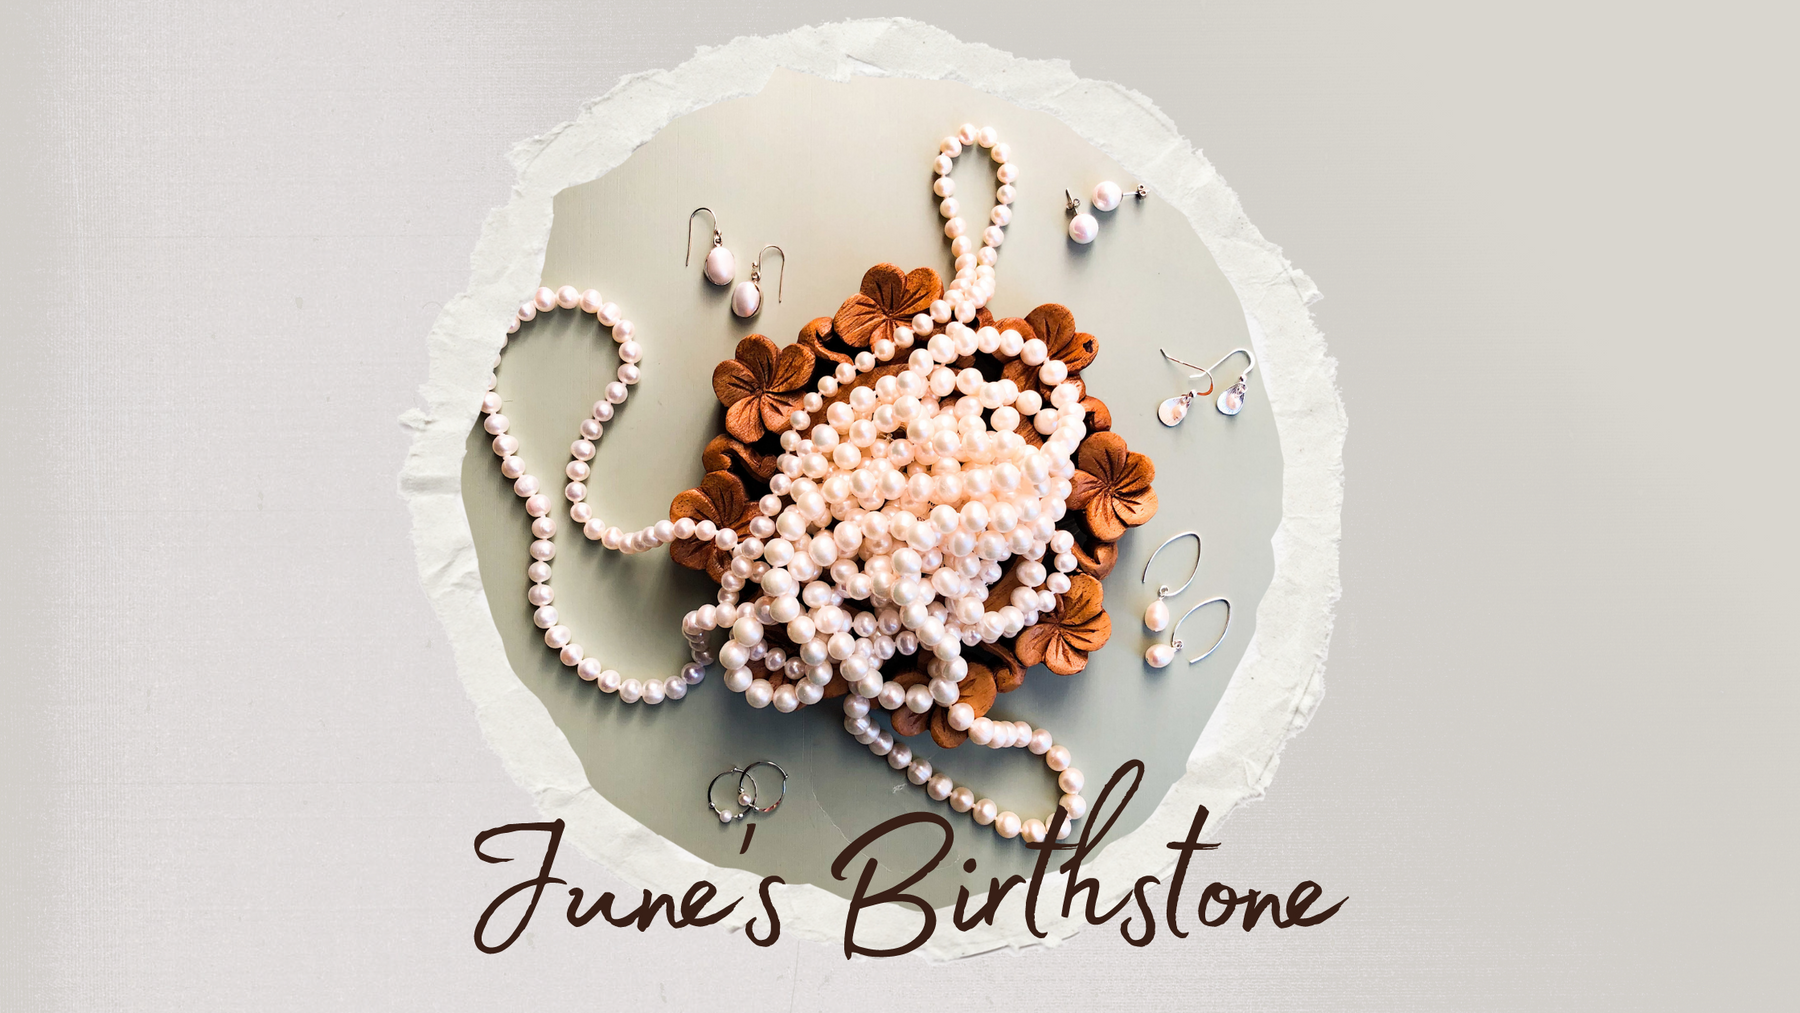 Pearl necklaces and earrings for June birthstone